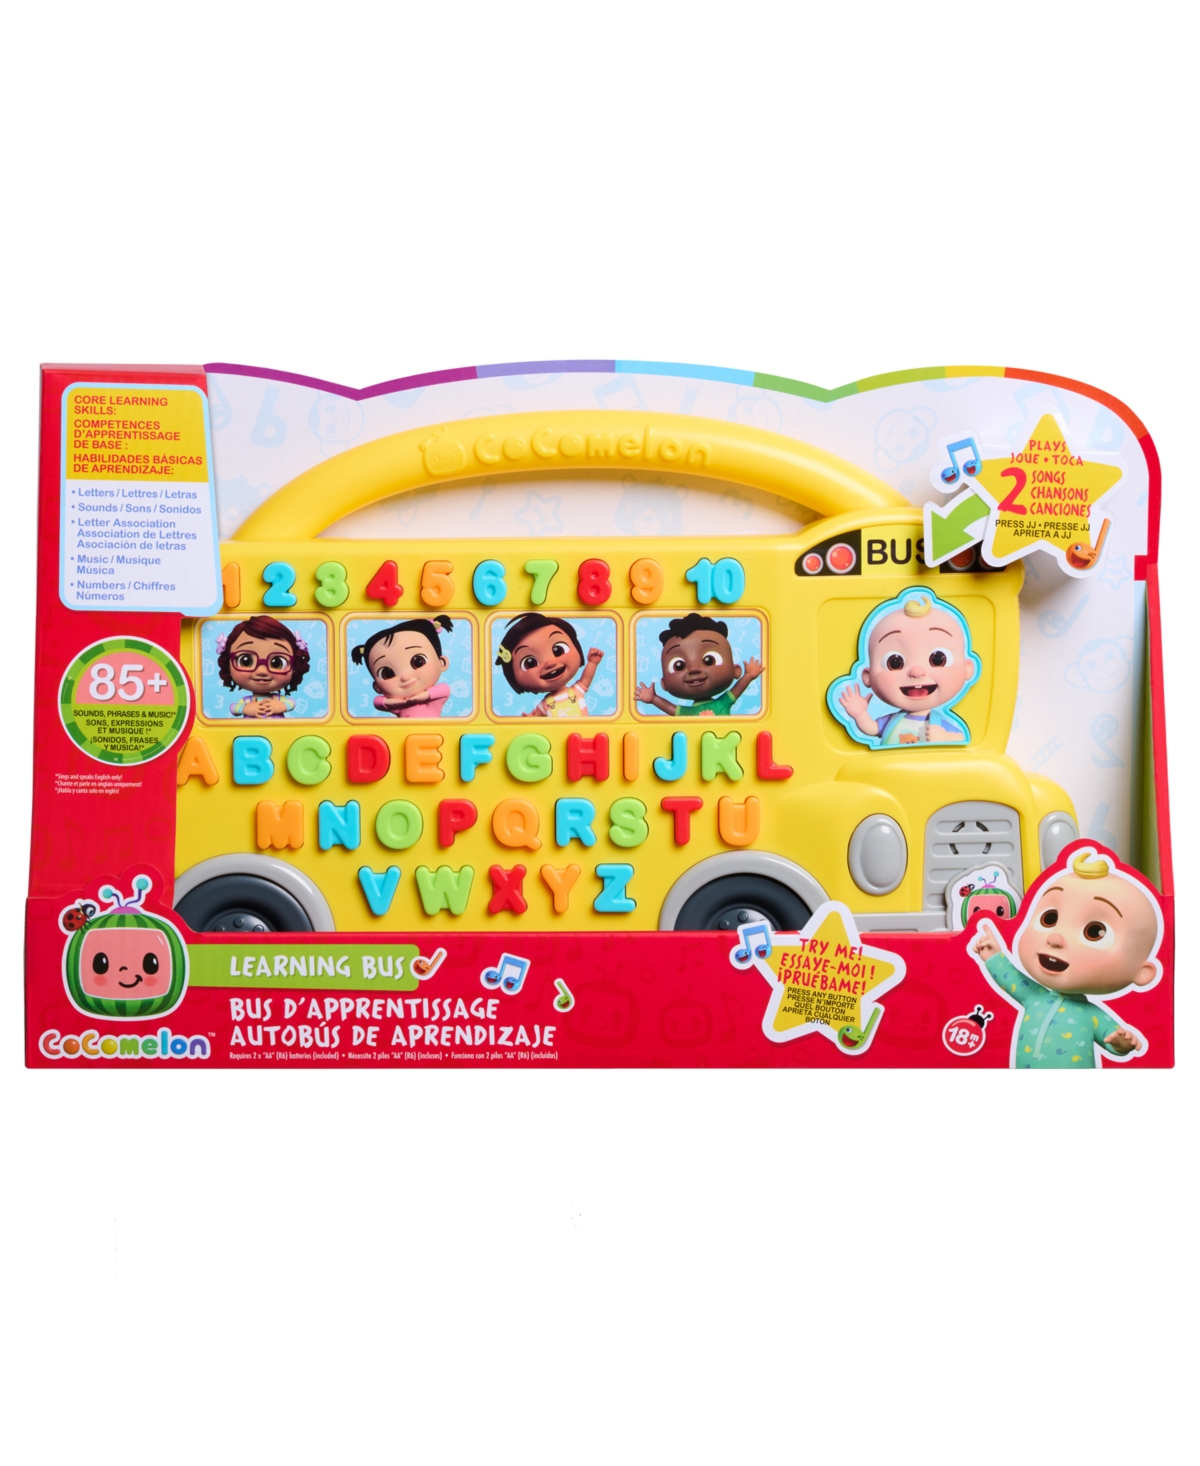 Cocomelon Kids' Learning Bus, Over 85 Learning Phrases, Counting, Alphabet, Music, Sounds, Yellow In No Color